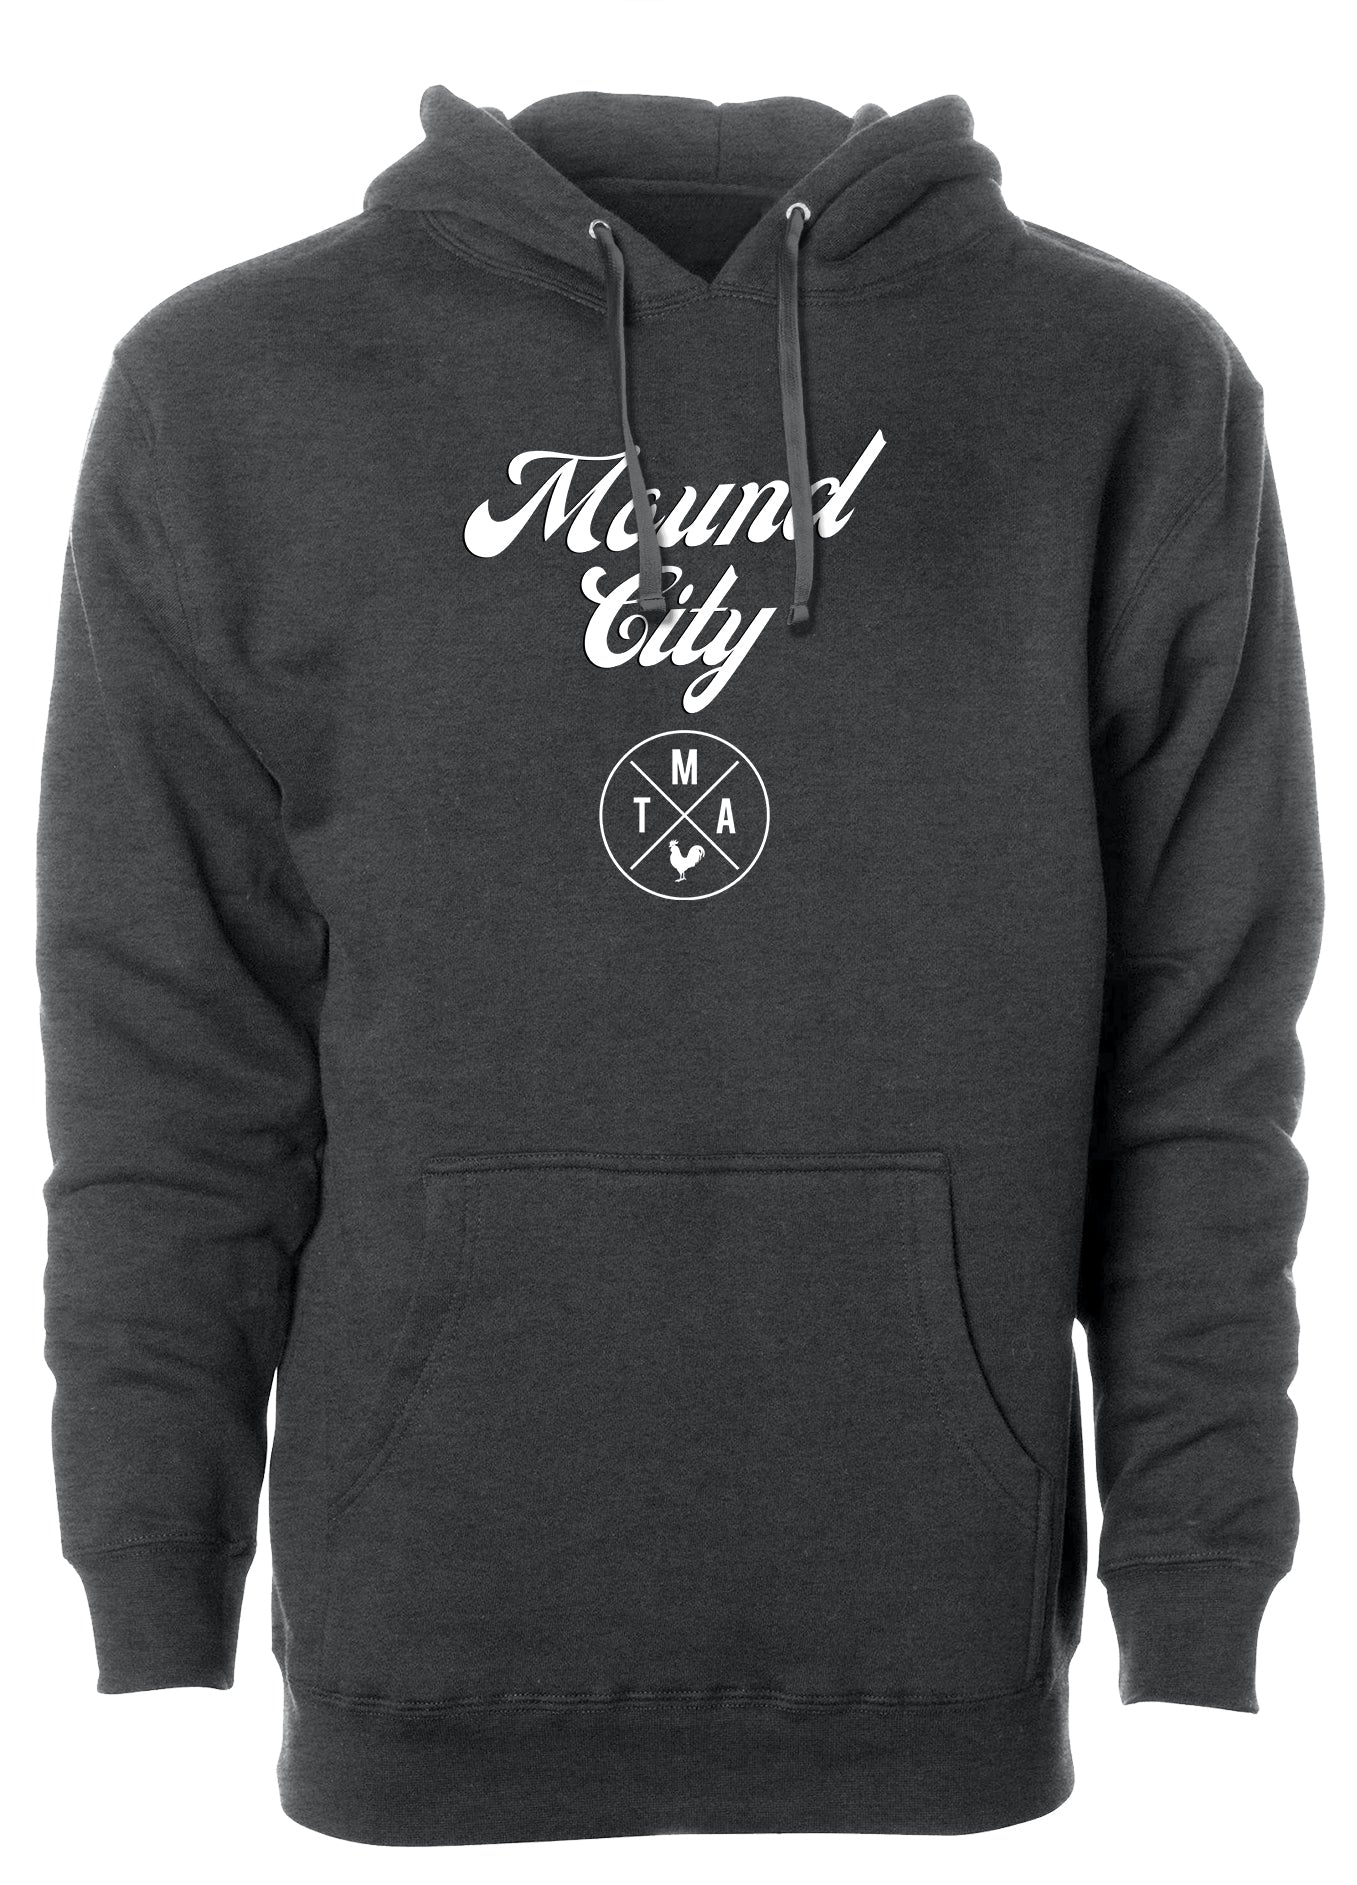 st louis mound city stl hooded sweatshirt apparel arch city tma charcoal